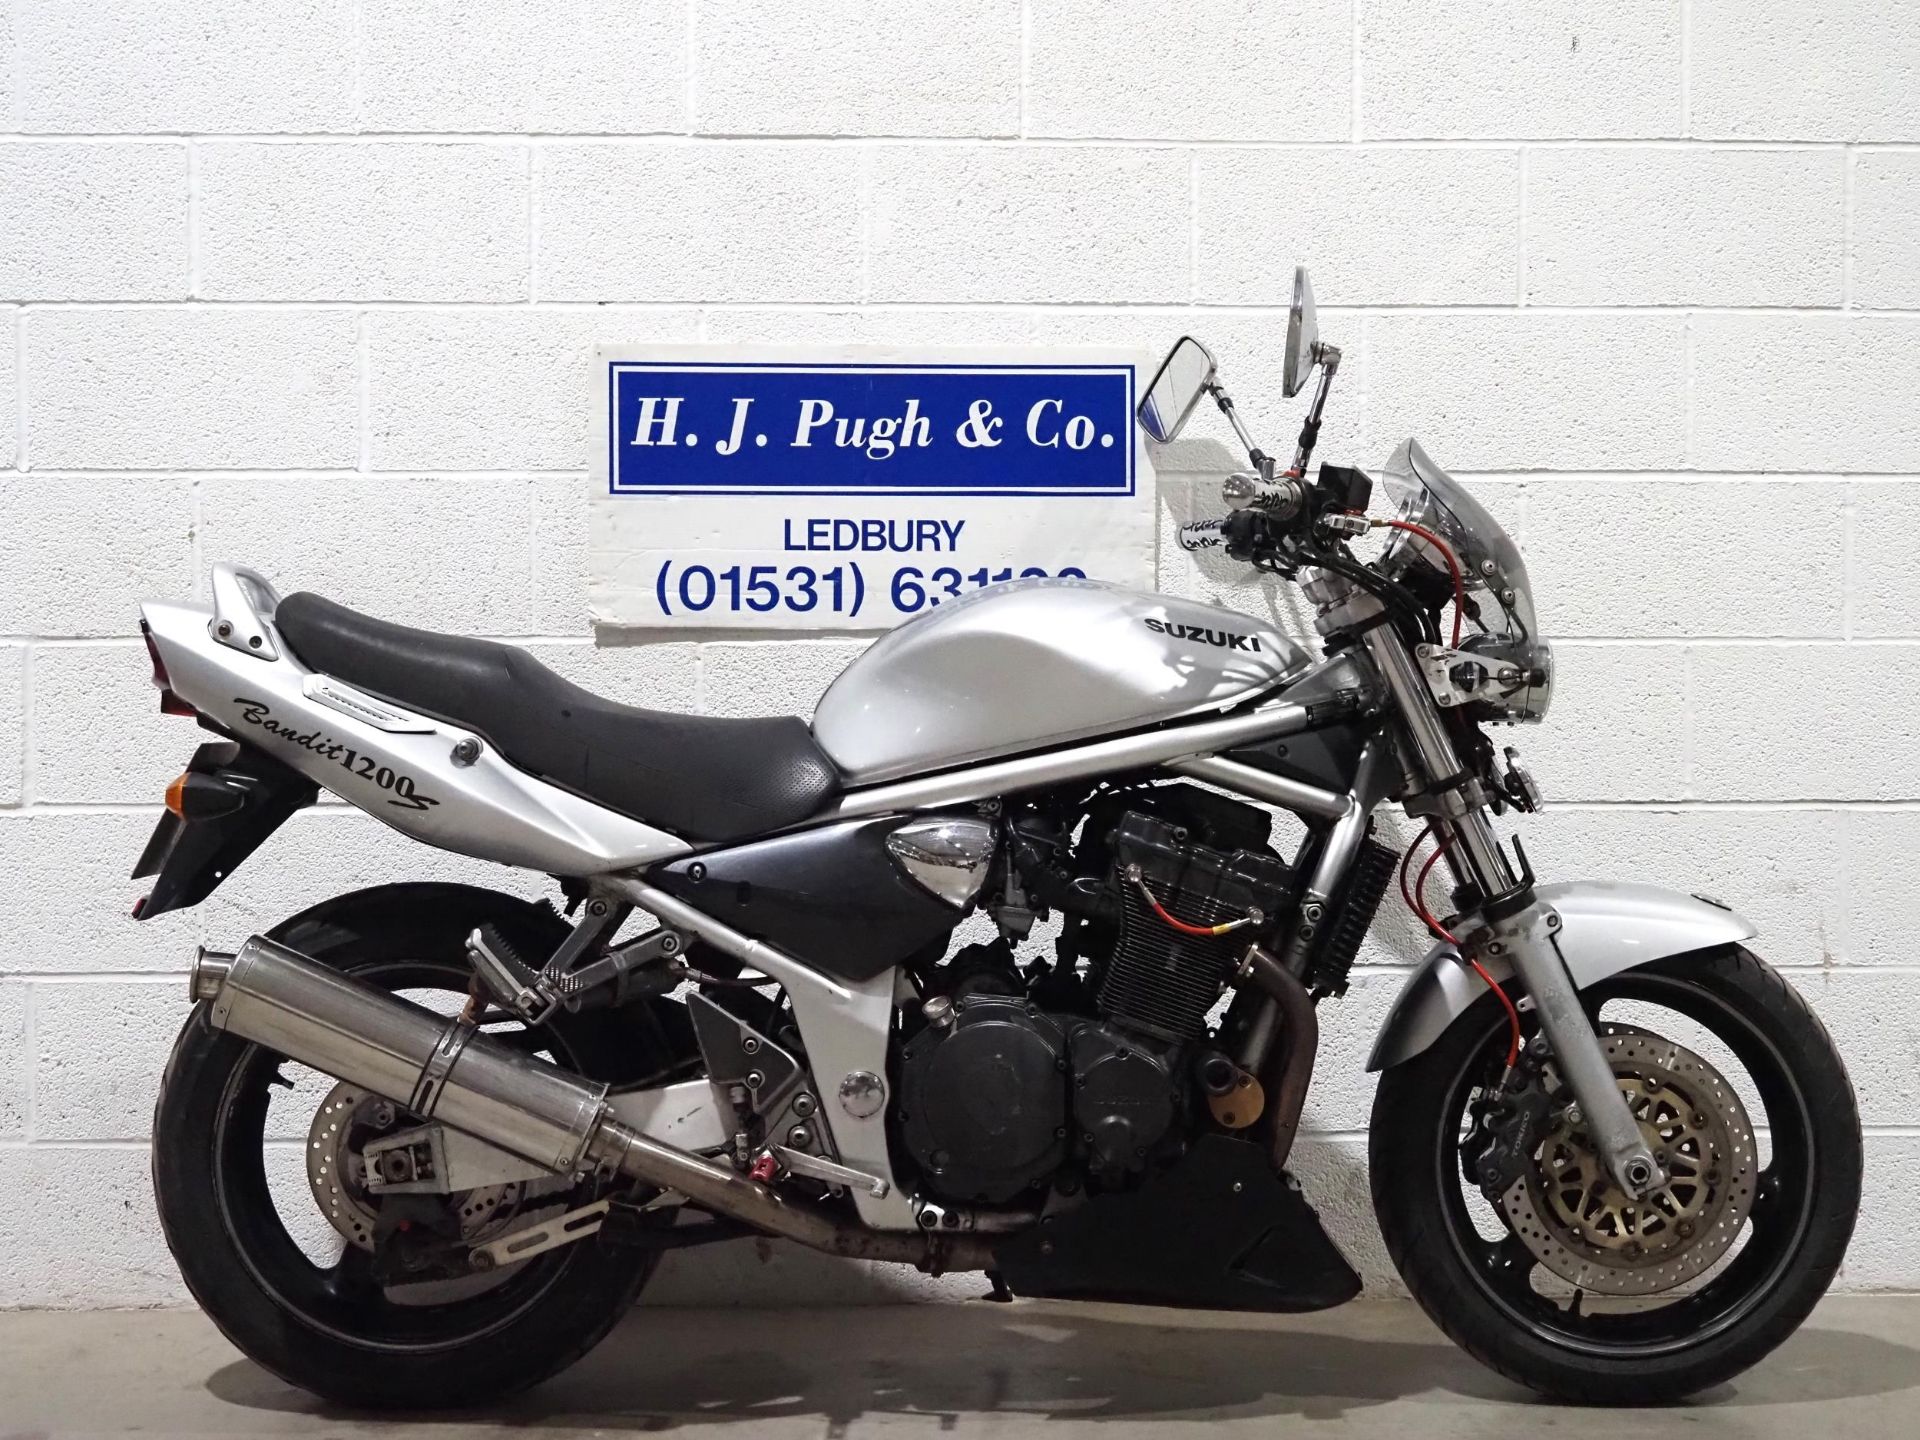 Suzuki GSF1200 Bandit motorcycle. 2001. 1197cc. Runs and rides. MOT until 19.03.25. Comes with